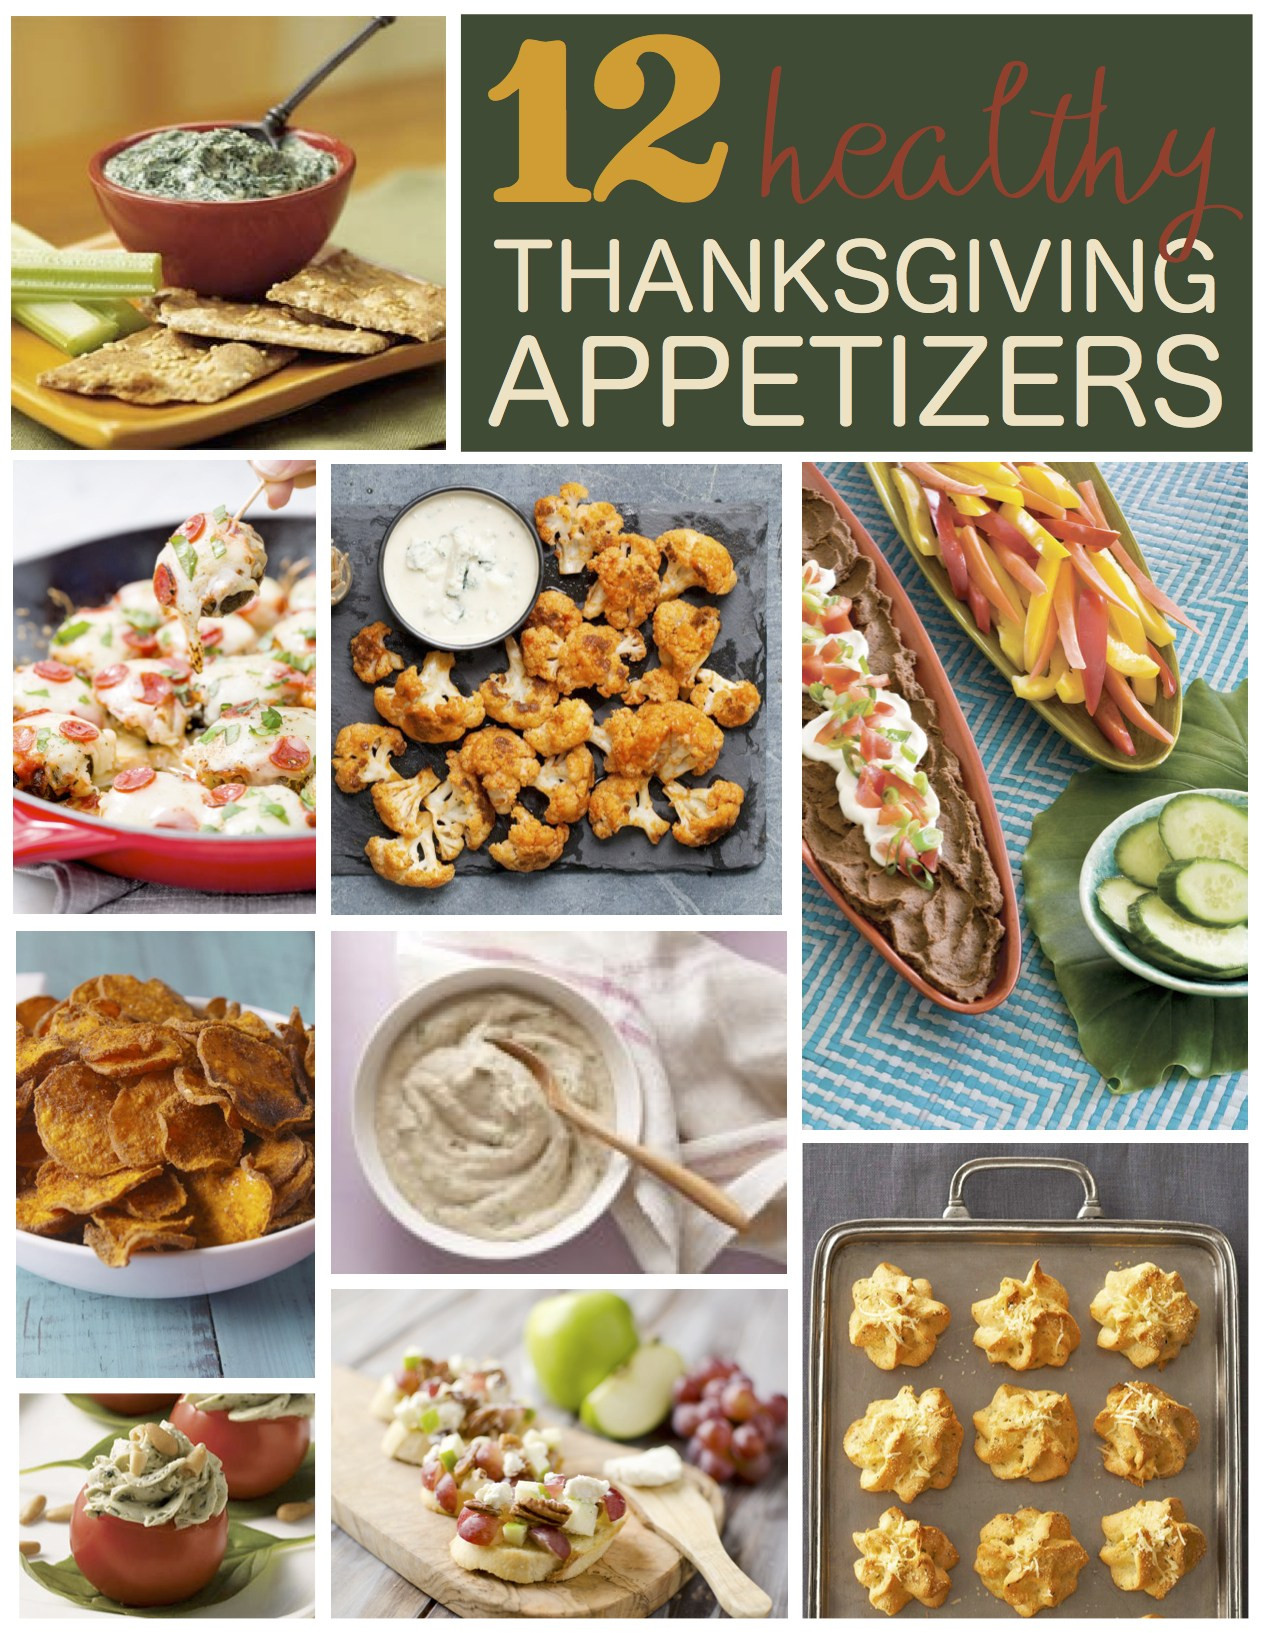 Healthy Thanksgiving Appetizers Easy
 12 Healthy Thanksgiving Appetizer Recipes Six Clever Sisters